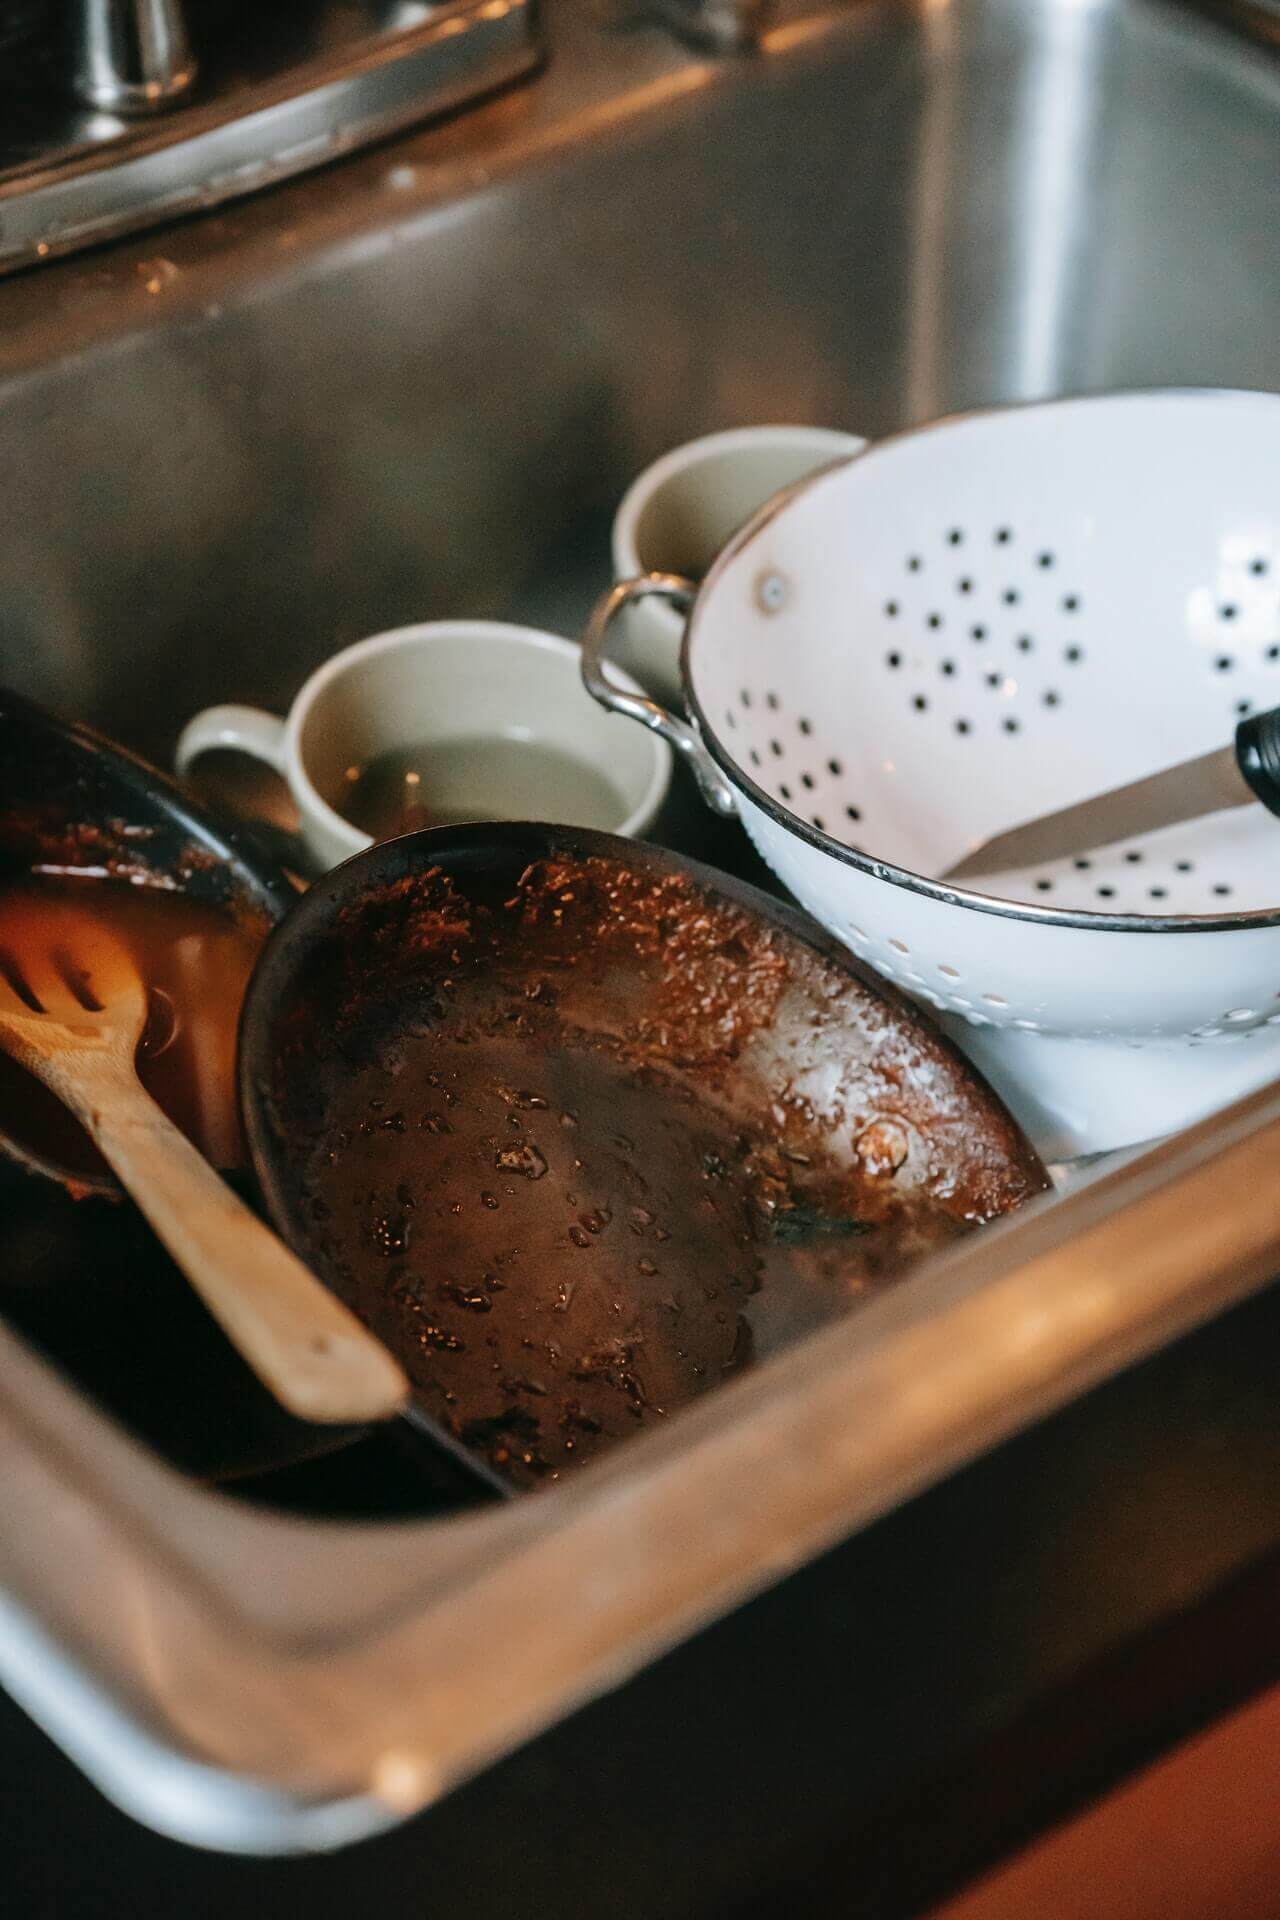 Dirty cookware in a sink